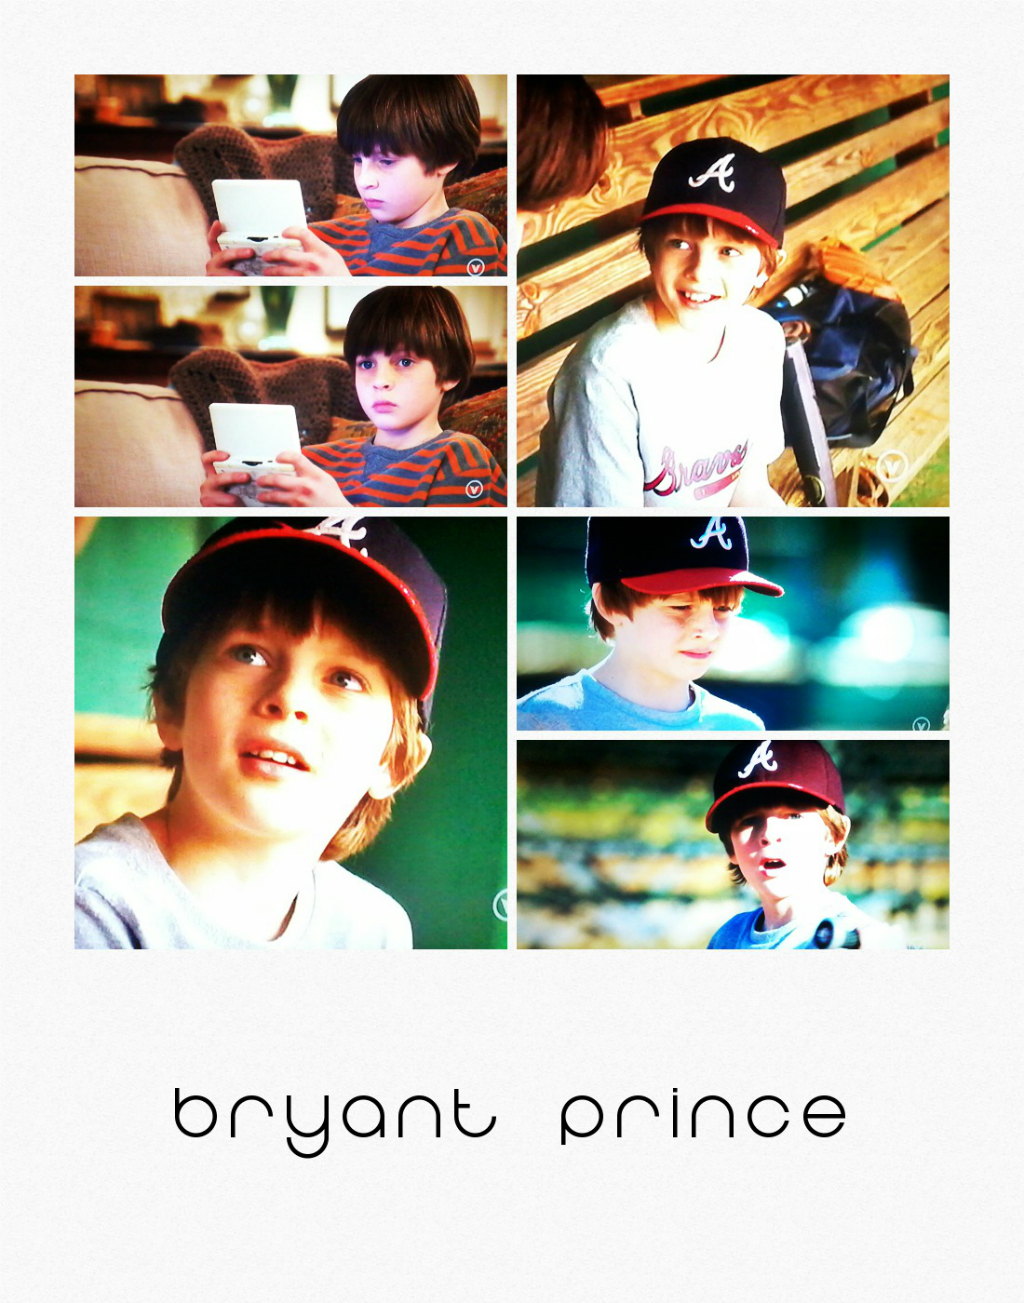 Bryant Prince in Fan Creations